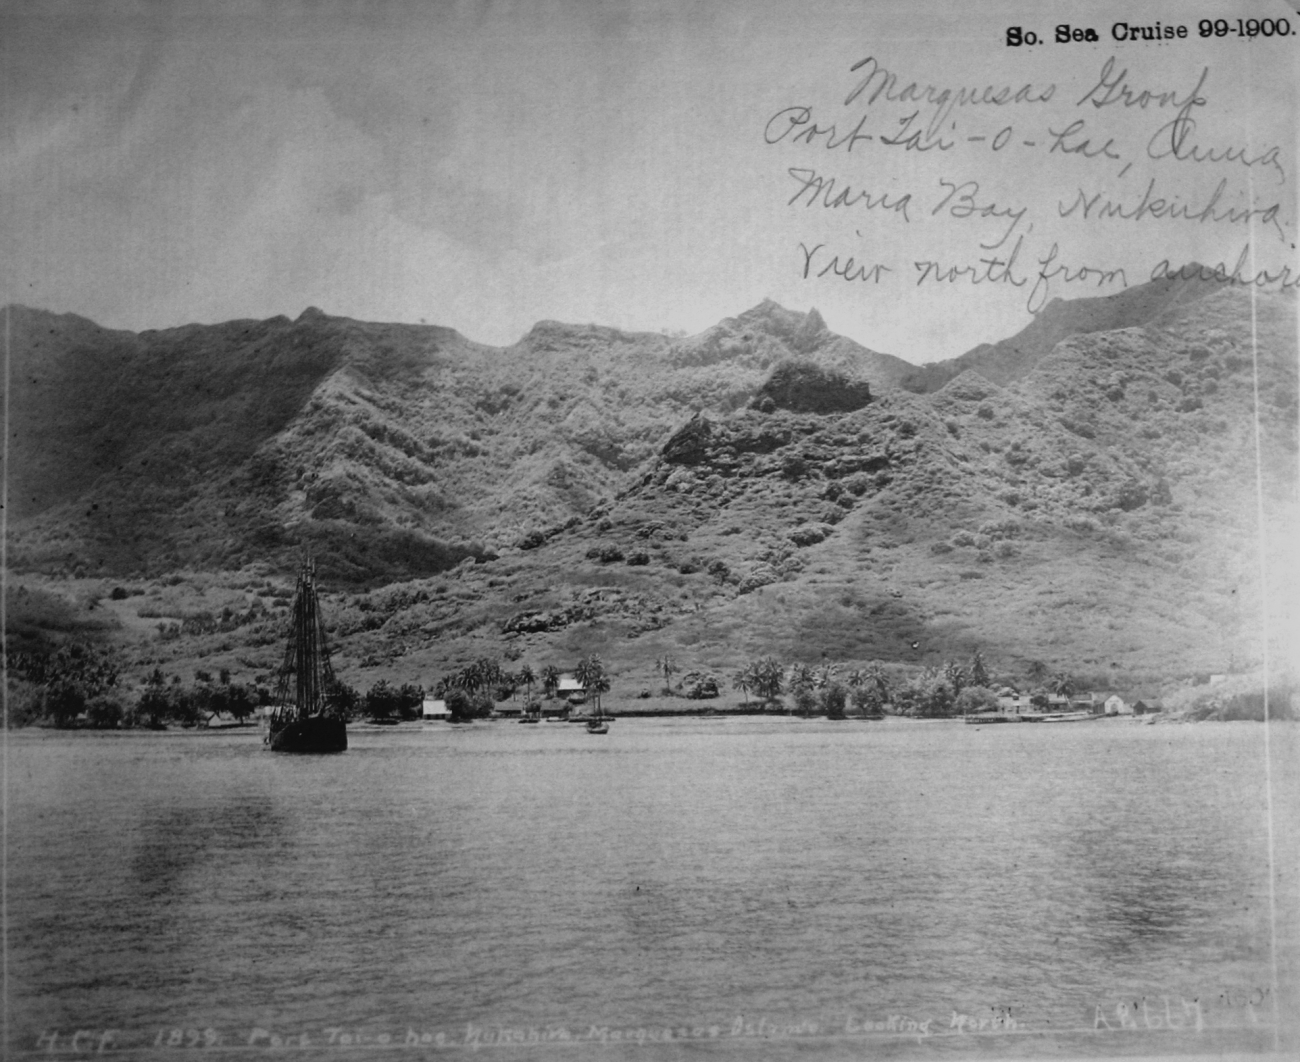 Marquesas Group, port Lai-o-Lae, Anna Maria Bay, Nukuhiva,view north from anchor, South Seas cruise, 99-1900